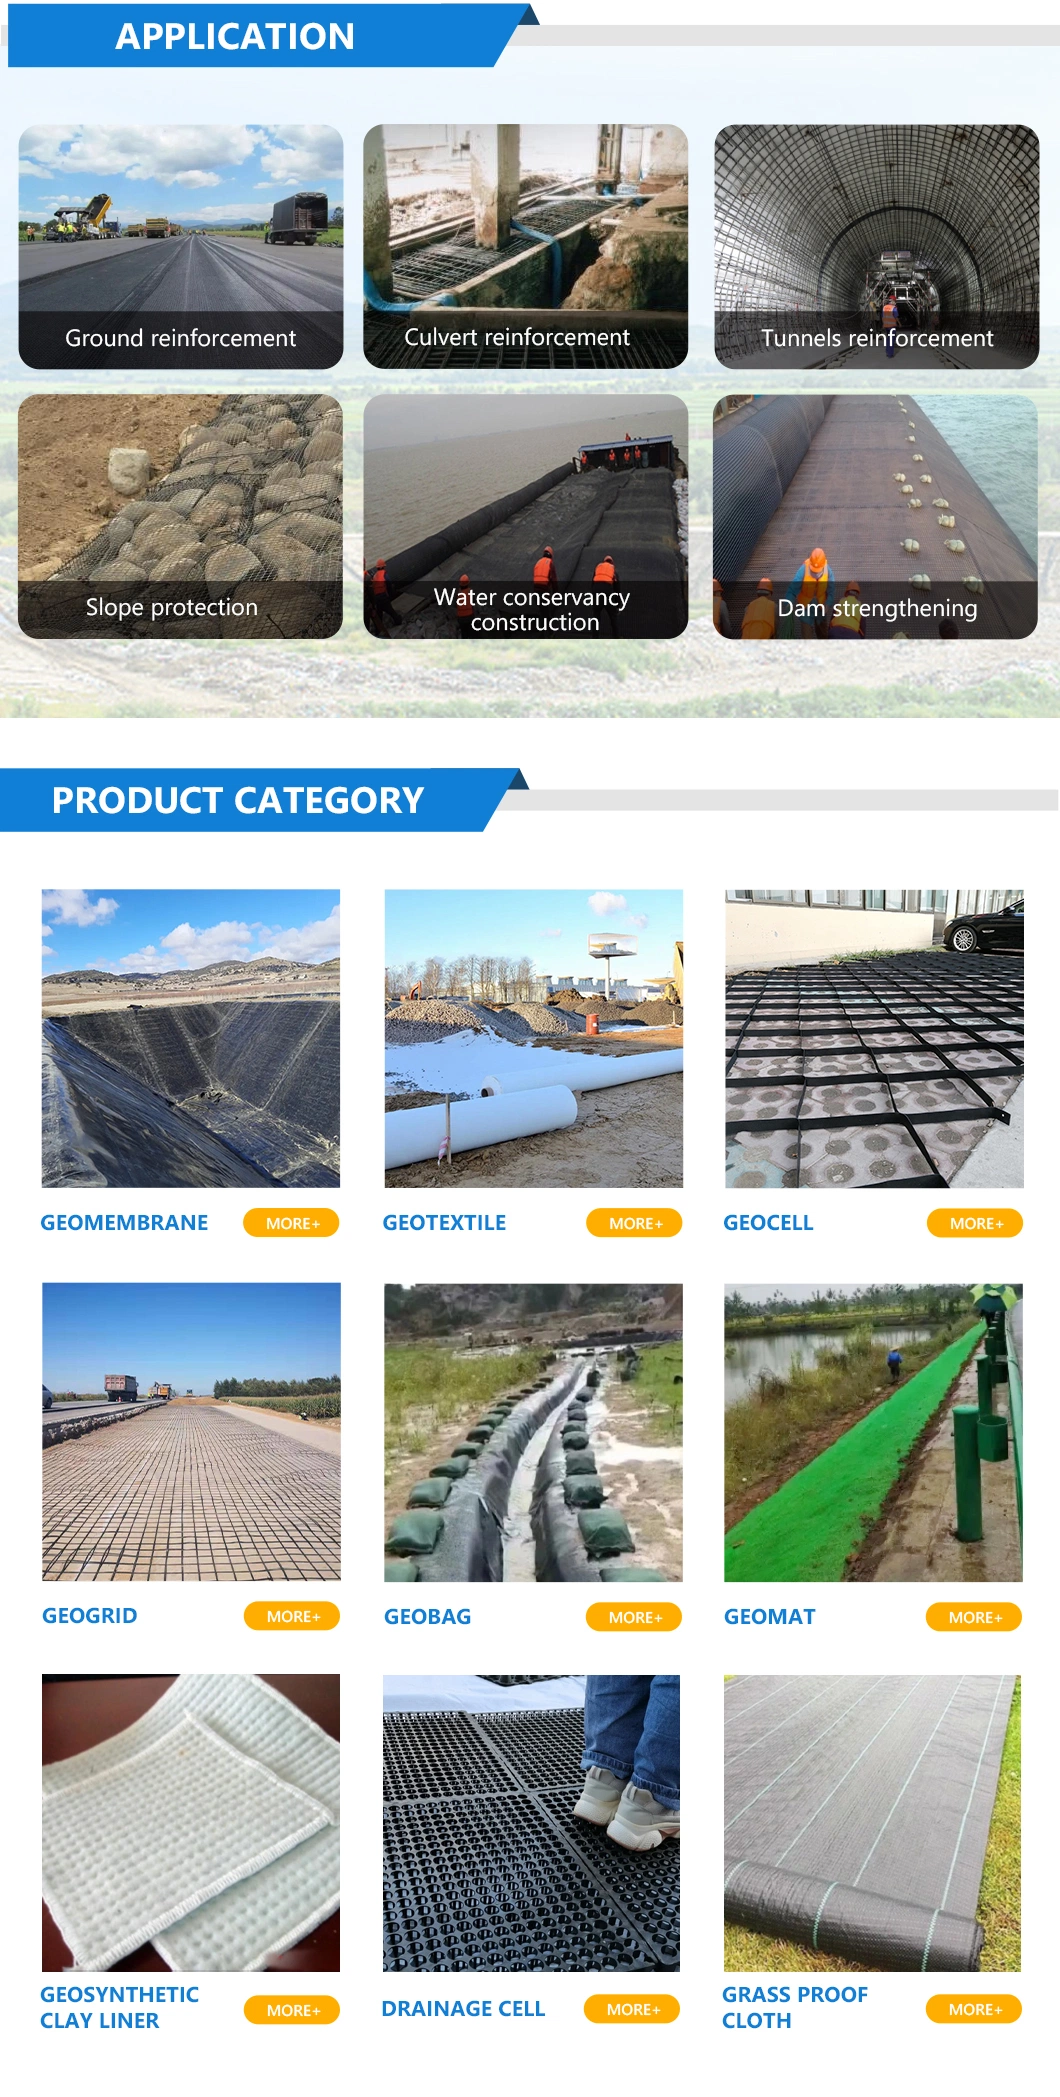 China Geogrid Manufacturer Customized Fiberglass/Polyester Biaxial Geogrid/PP Polyester Uniaxial Geogrid/Plastic/Mining/Steel-Plastic Geogrid Factory